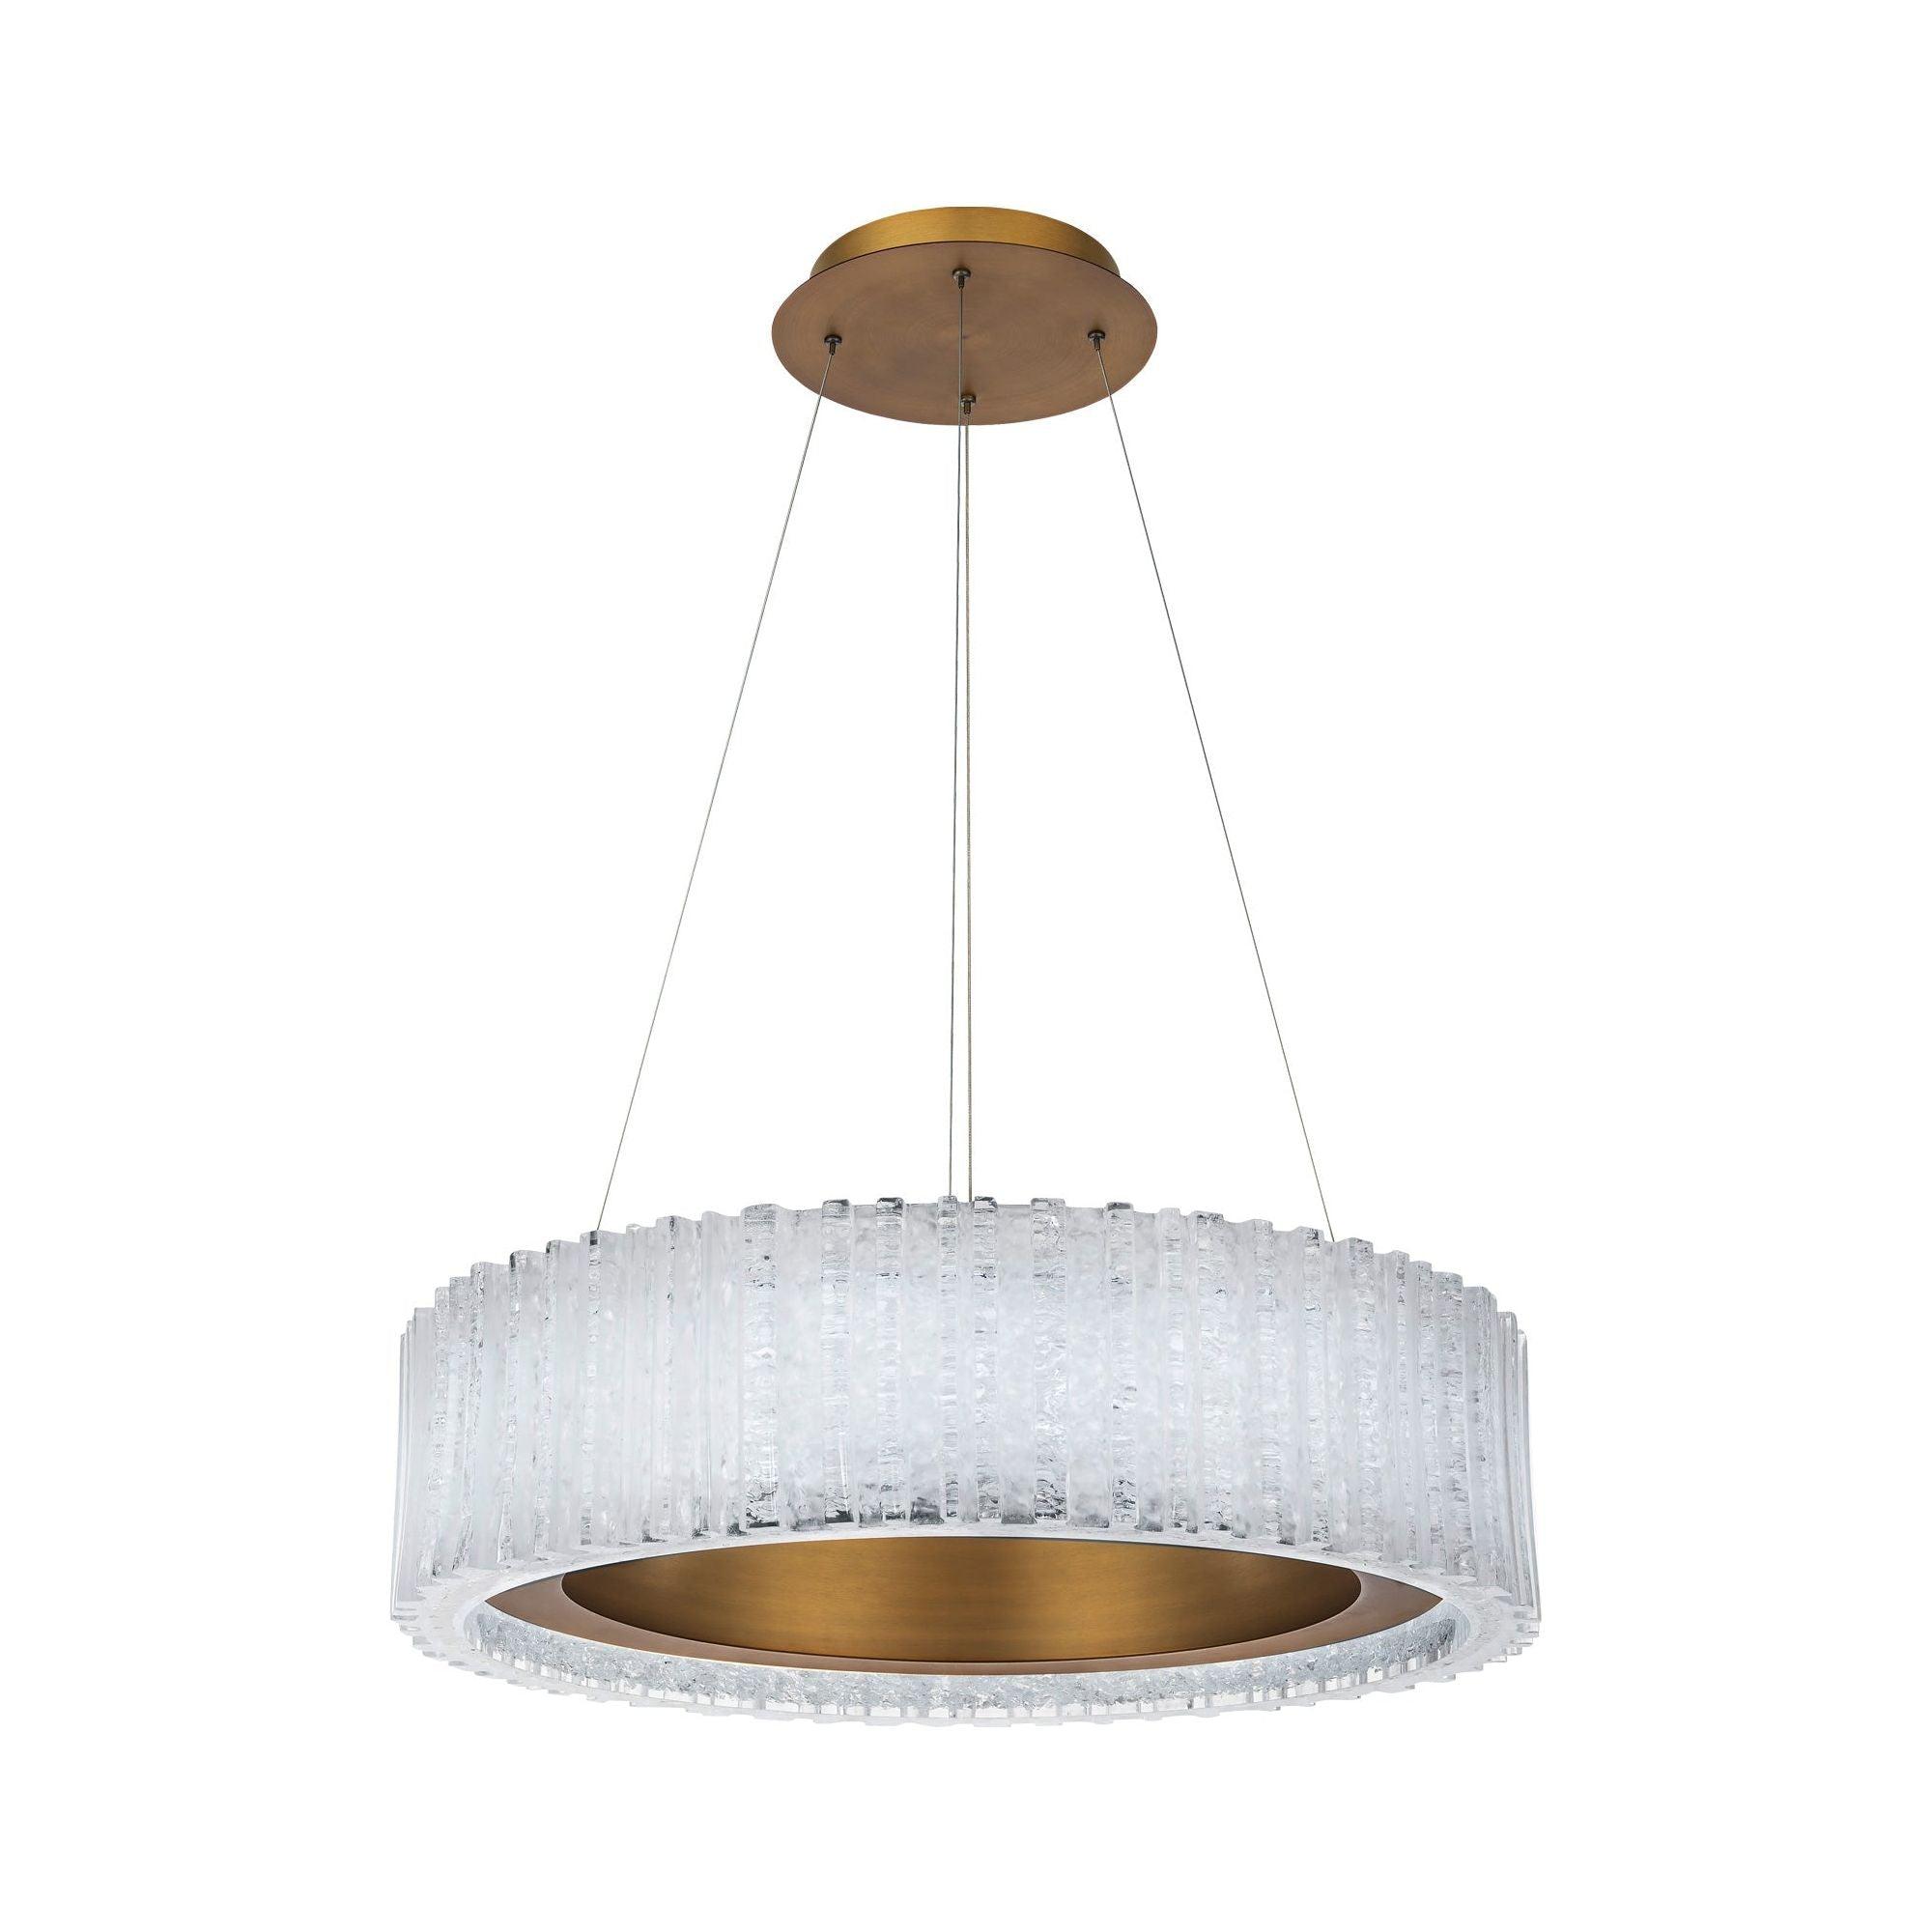 Modern Forms - Rhiannon 28" LED Round Chandelier - Lights Canada